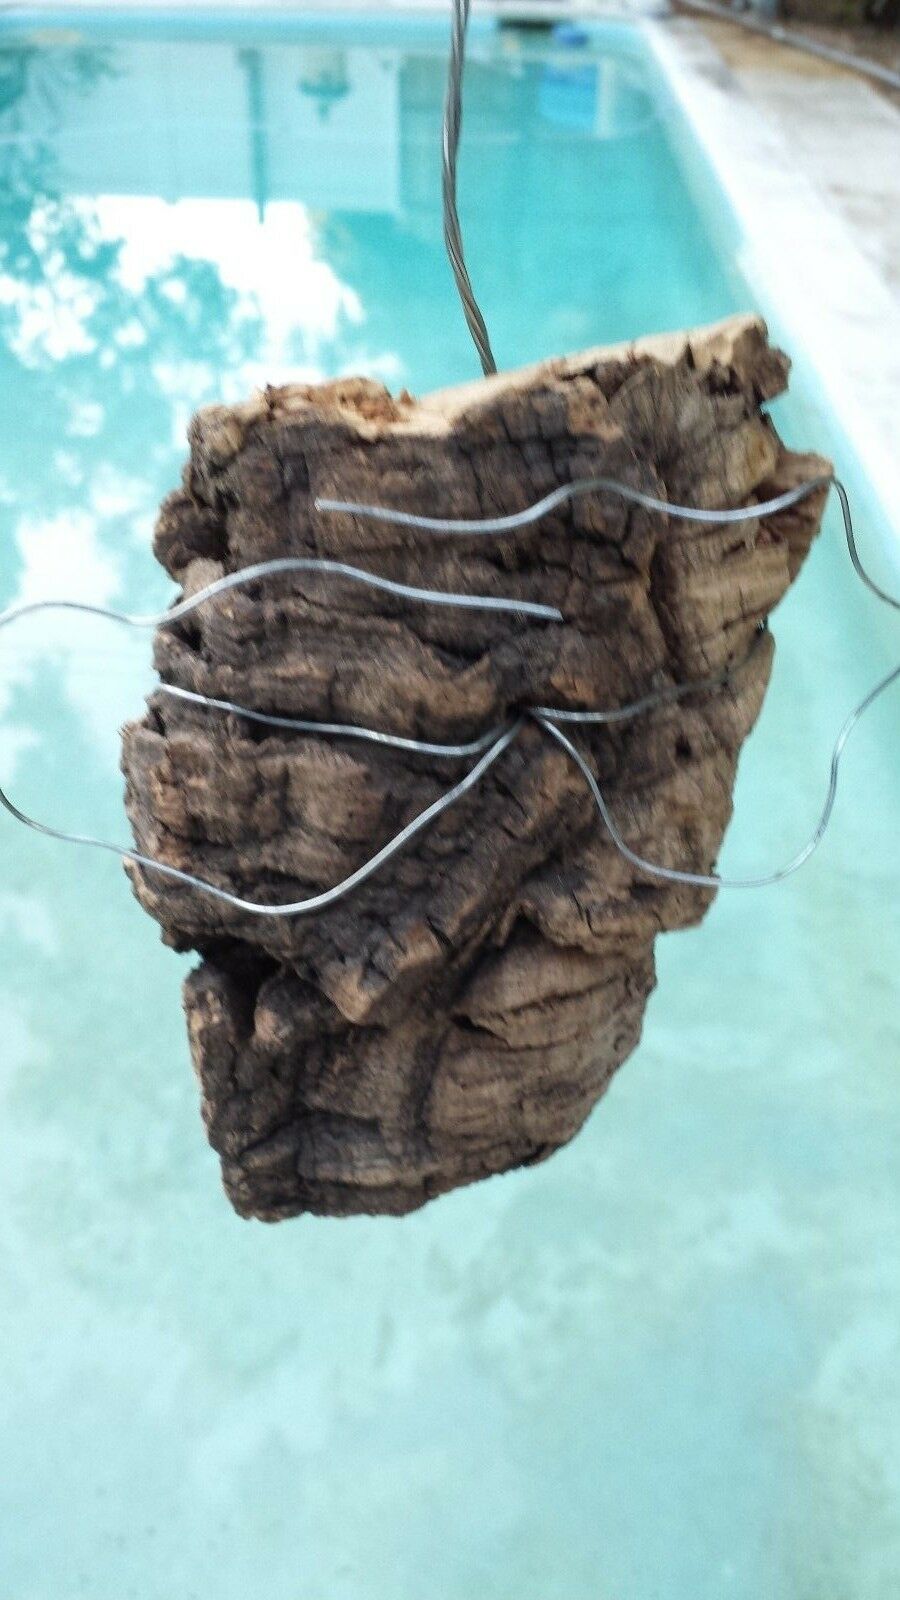 Cork Bark mounting with hanging wire attached orchid air plant various sizes